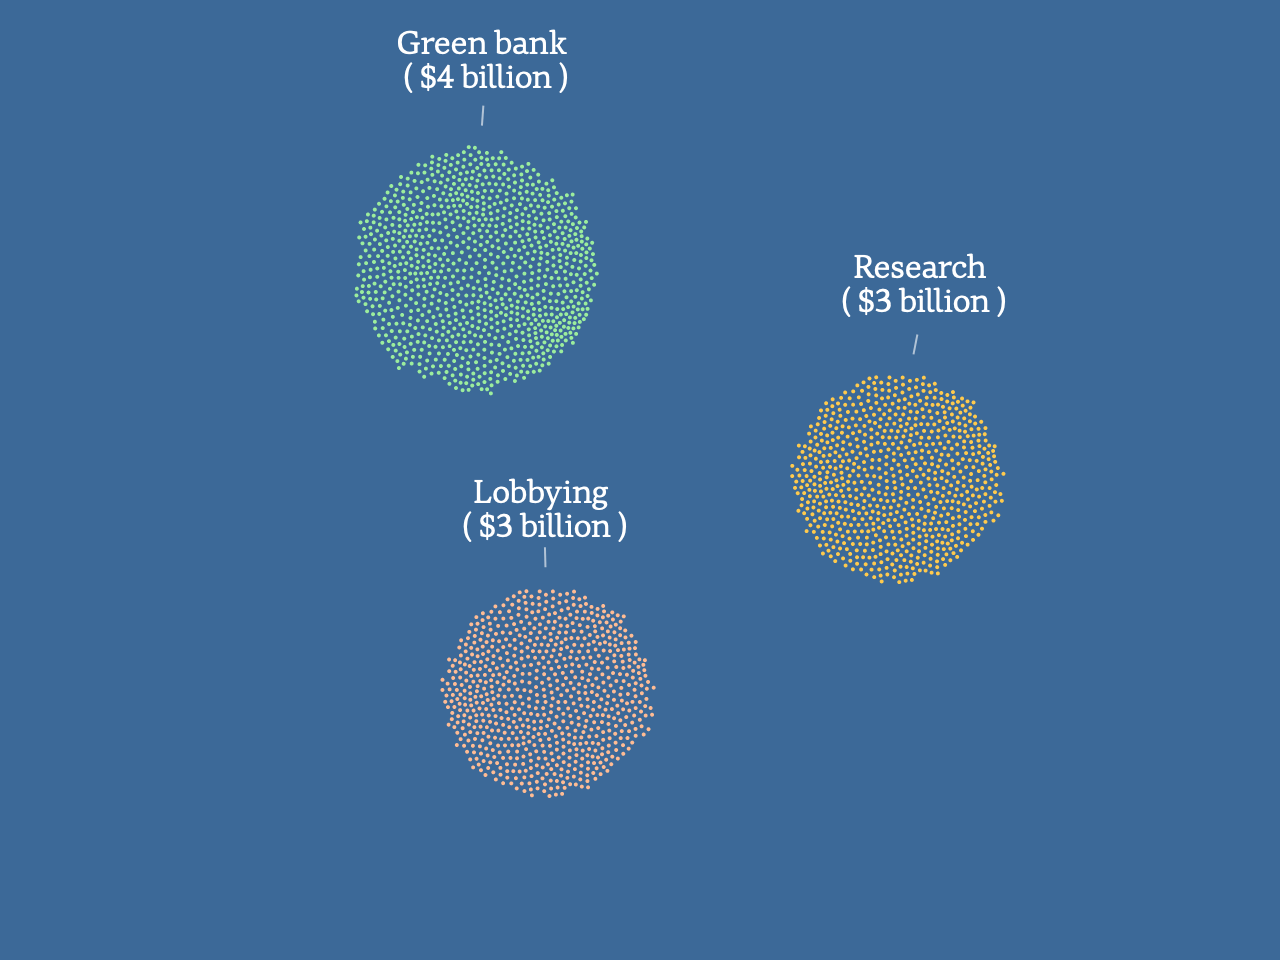 A graphic showing dots representing $3 billion spent on lobbying, $4 billion in a green bank and $3 billion on research.